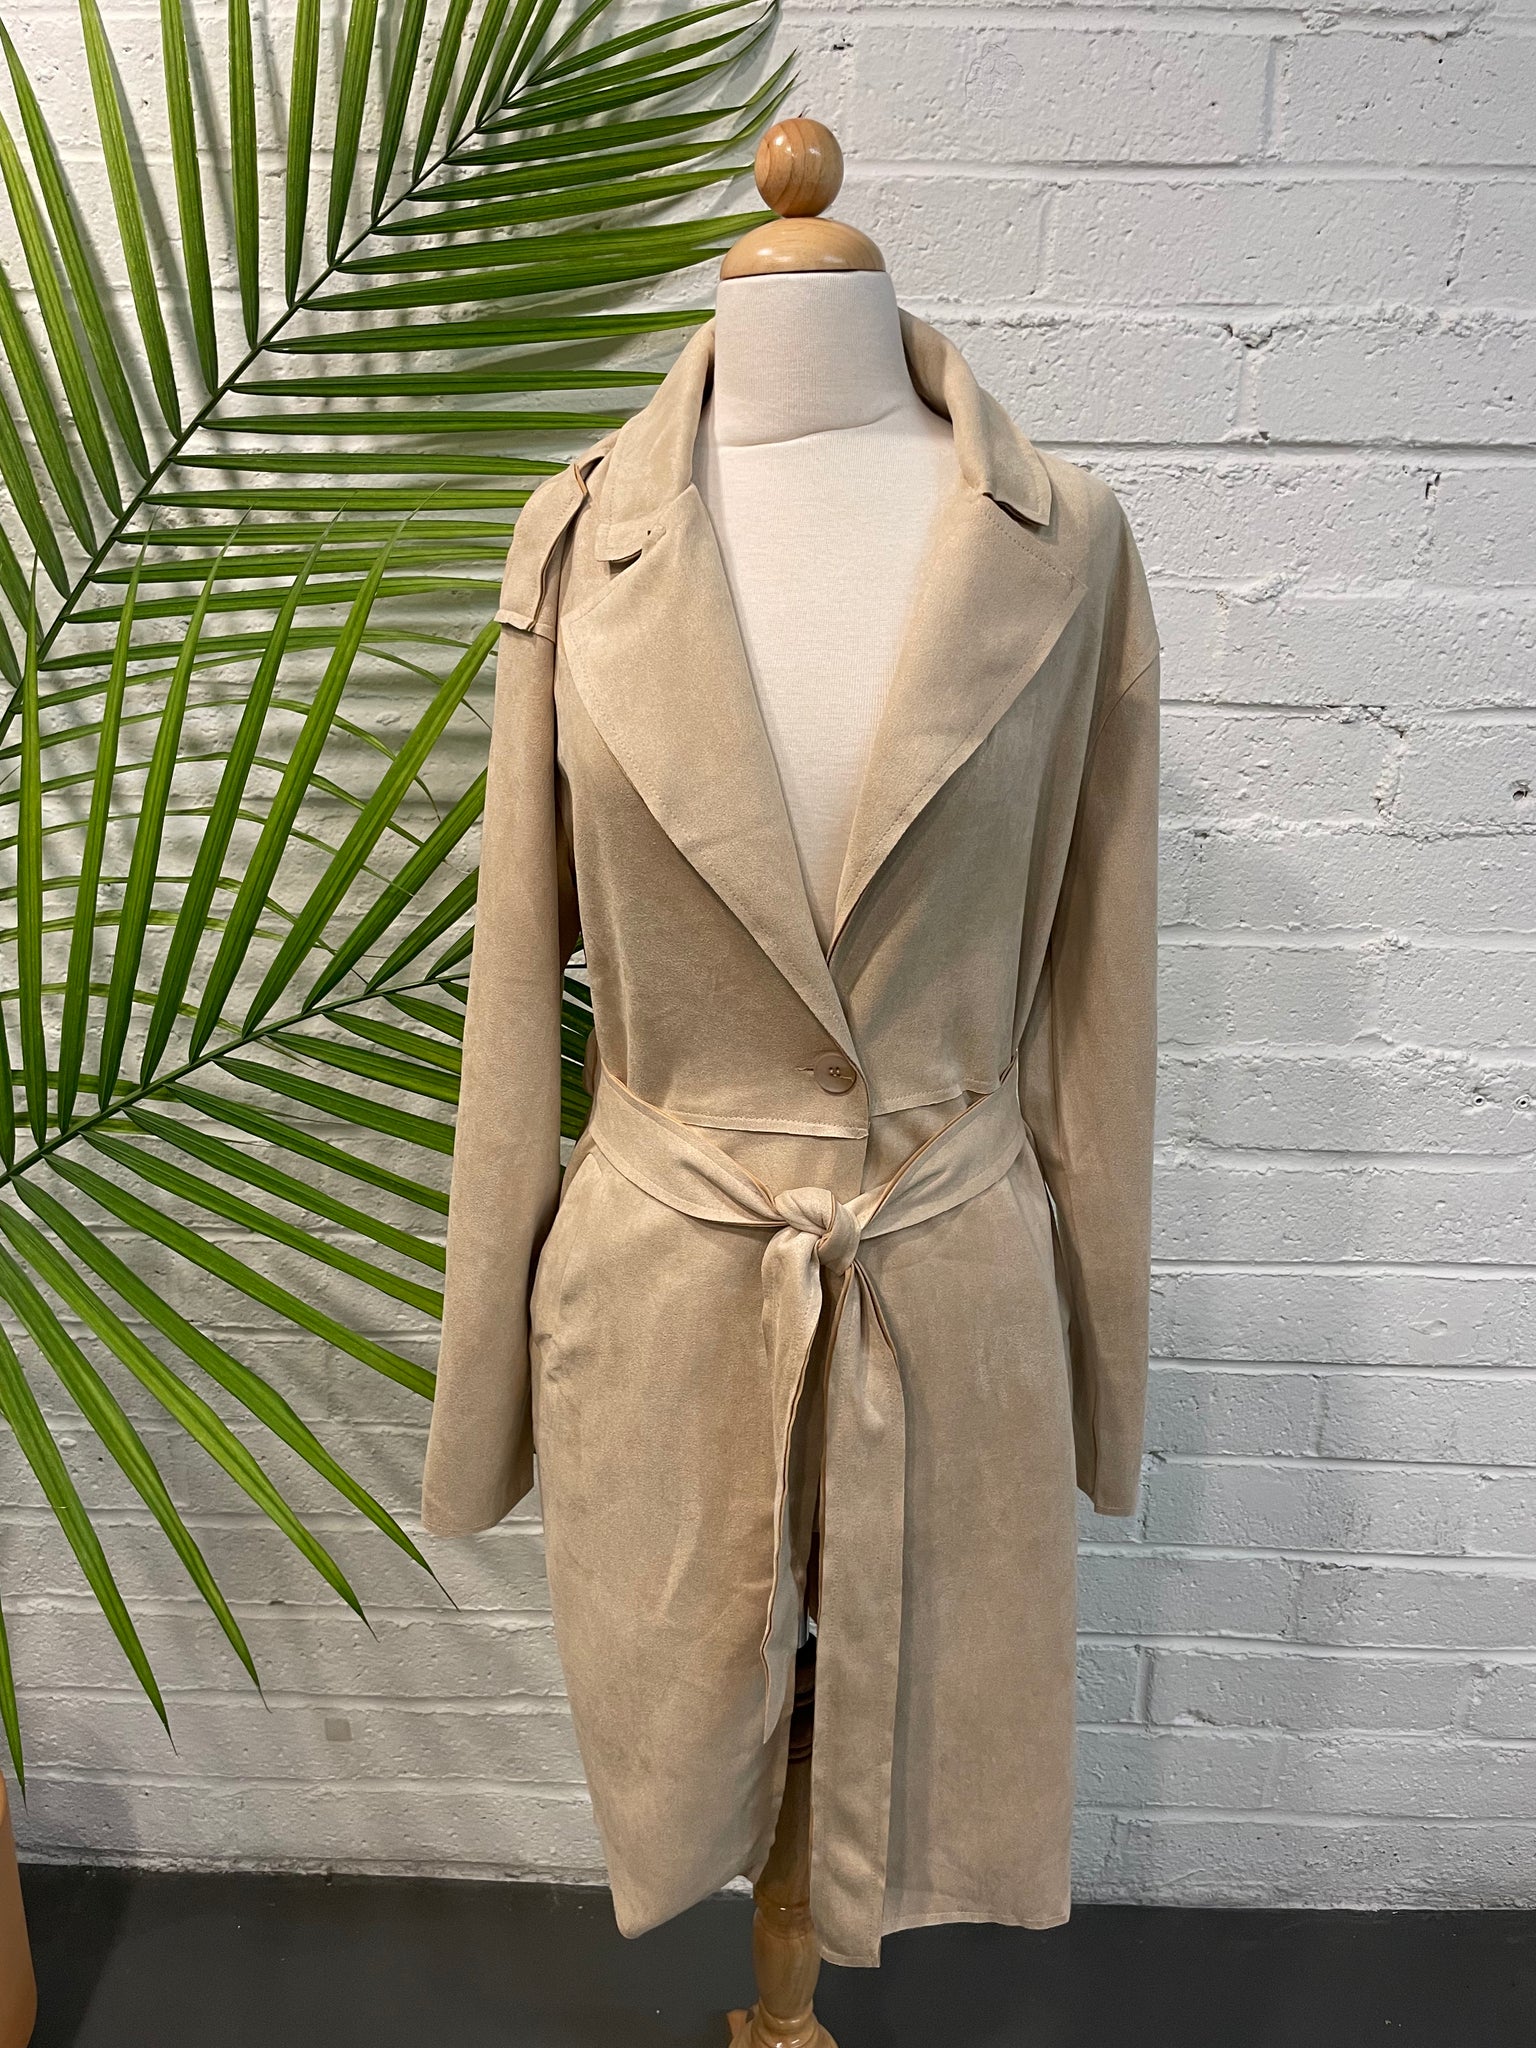 Brooklyn baby coat - NewPalm Collection